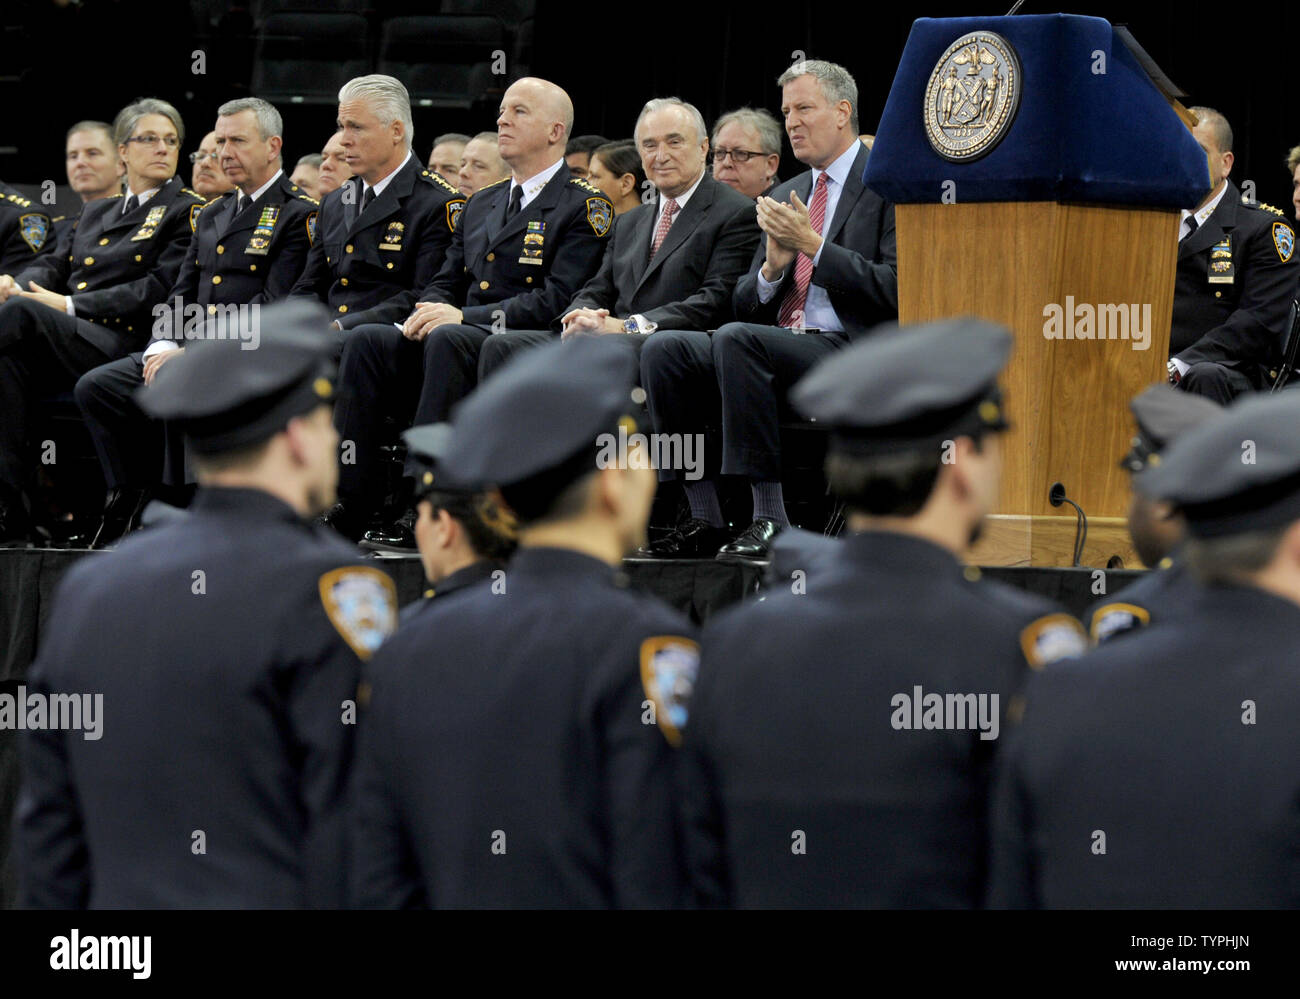 New York City Mayor Bill de Blasio and New York Police Commissioner William Bratton sit on stage during the New York City Police Academy's graduation ceremony at Madison Square Garden in New York City on December 27, 2014. The relationship between de Blasio and the NYPD has been poor in the past weeks due to the alleged lack of support for the police from de Blasio.      UPI/Dennis Van Tine Stock Photo